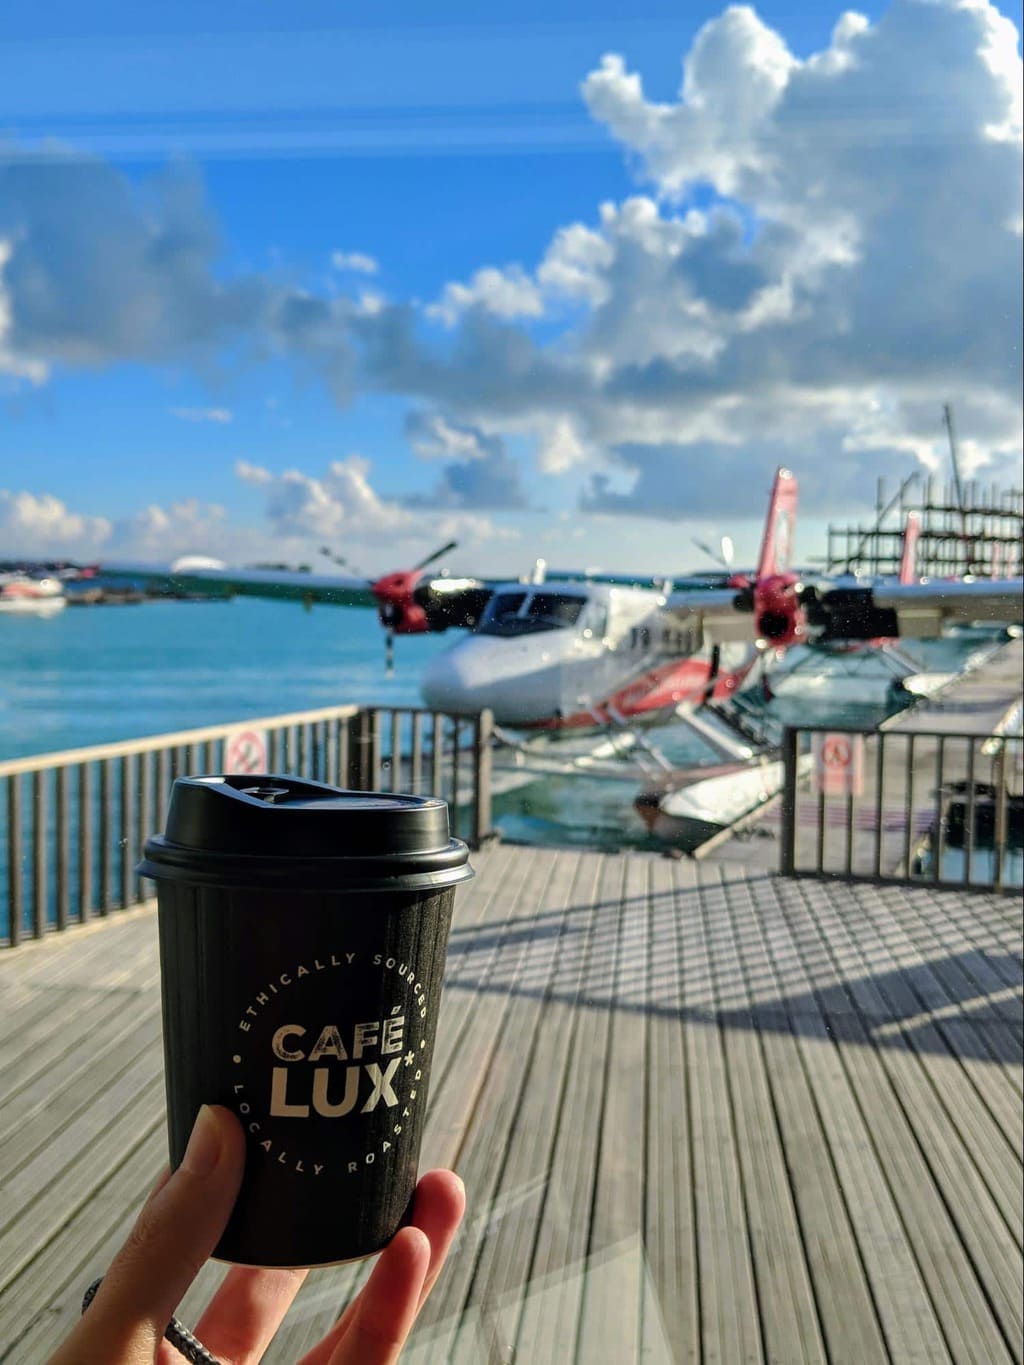 LUX* coffee - one of the brand’s promises